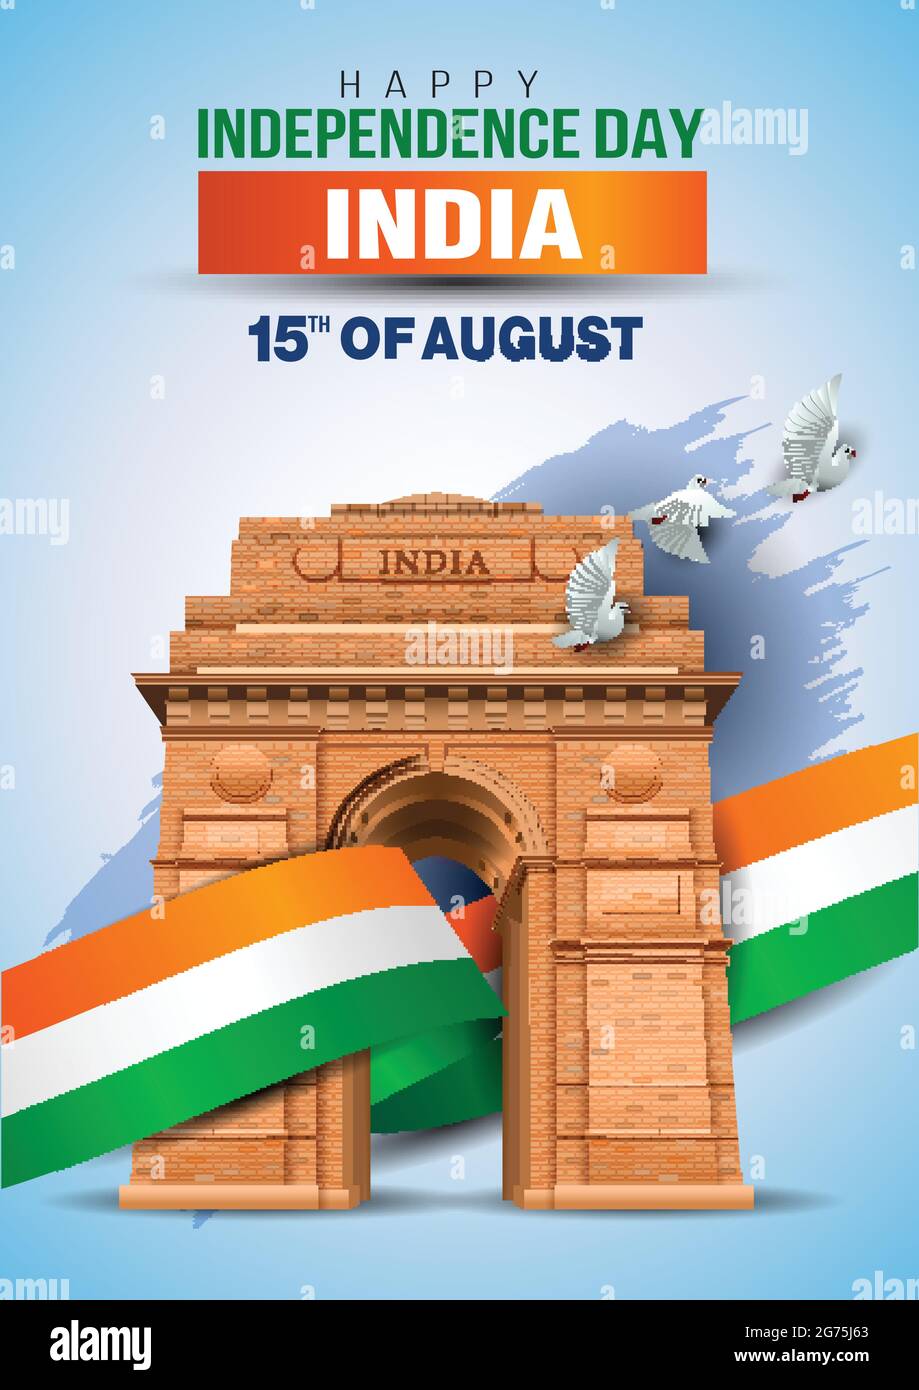 vector illustration of happy independence day in India celebration on August 15. vector India gate with Indian flag design and flying pigeon Stock Vector